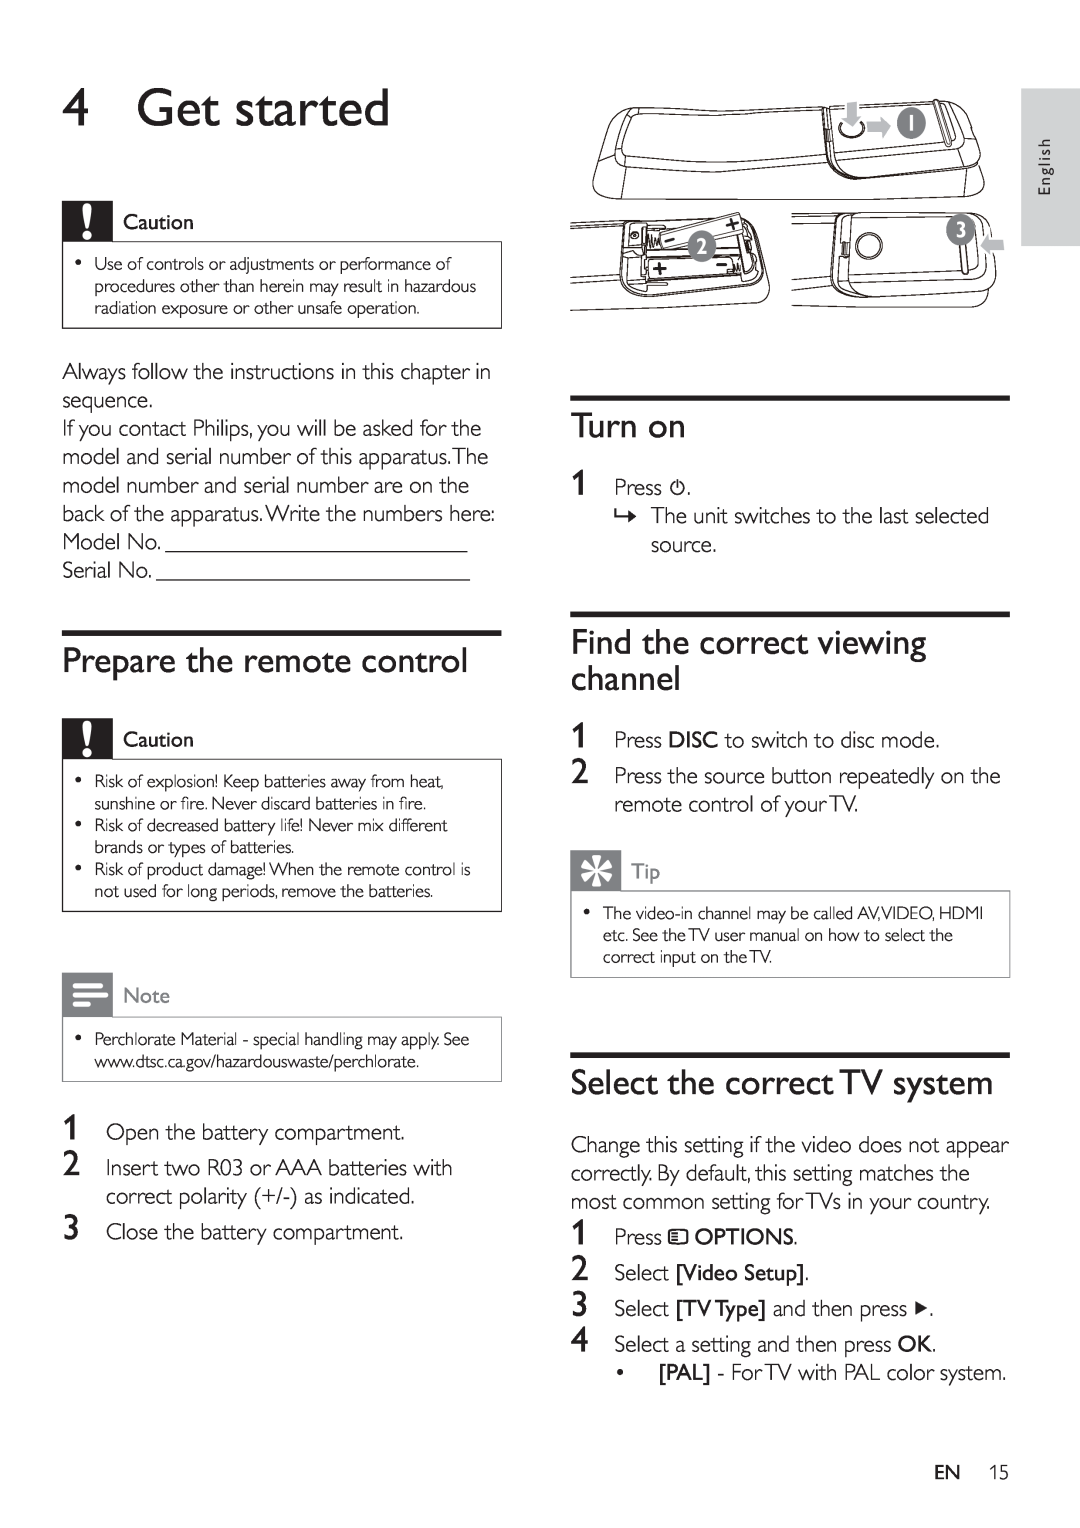 Philips HSB2351/51 user manual Get started, Turn on, Prepare the remote control, Find the correct viewing channel 